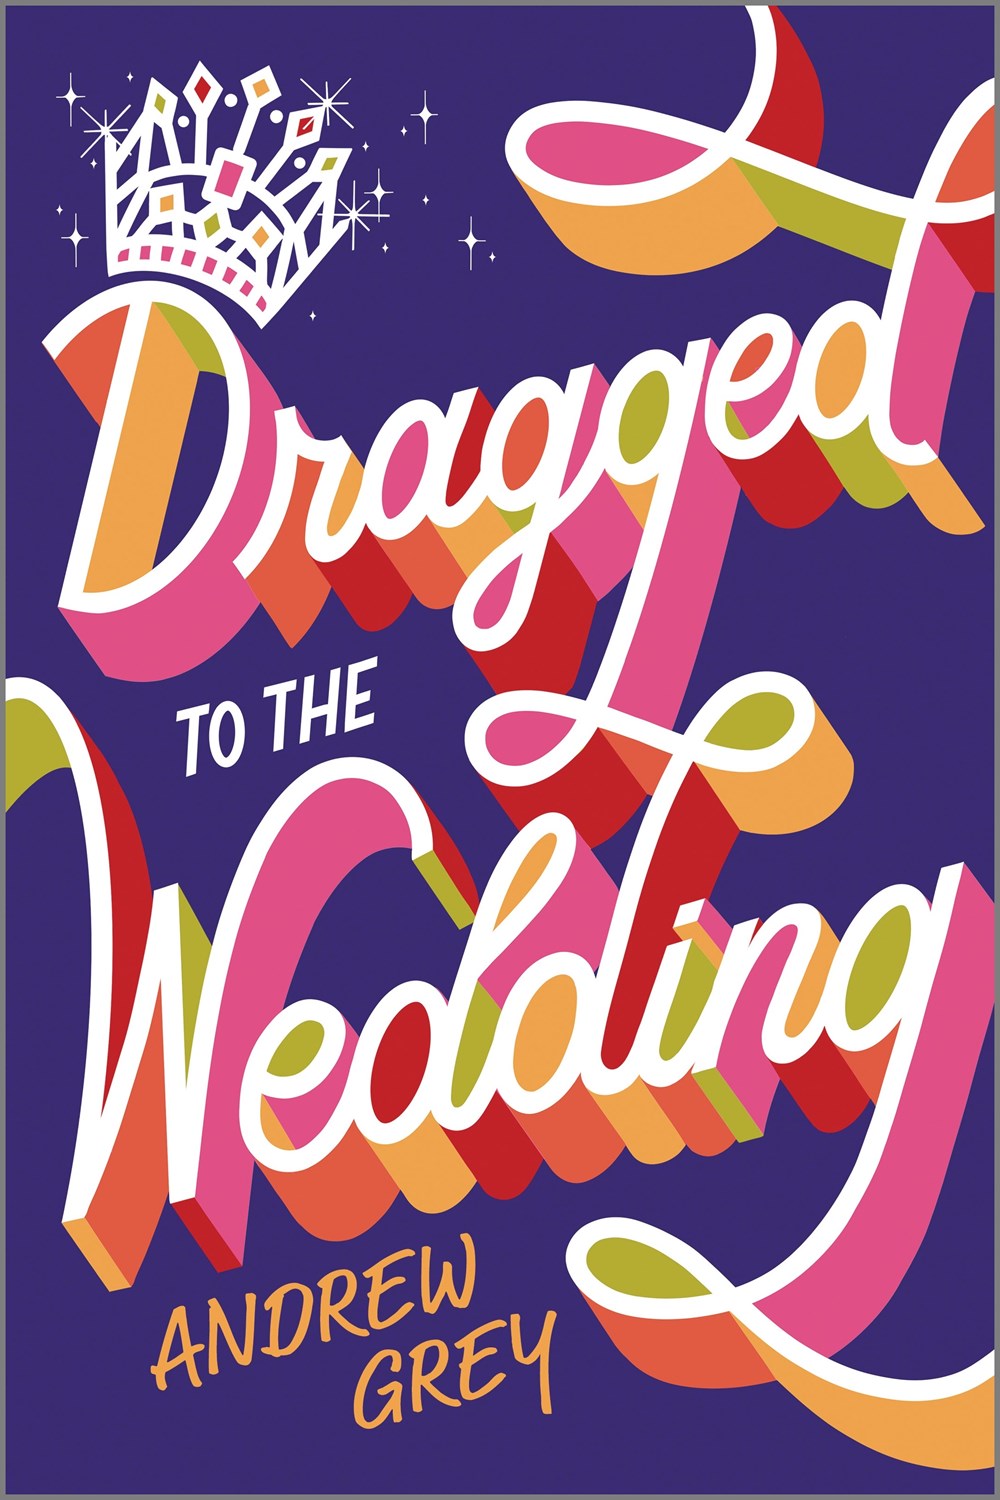 Dragged To The Wedding by Andrew Grey (Paperback) (PREORDER)